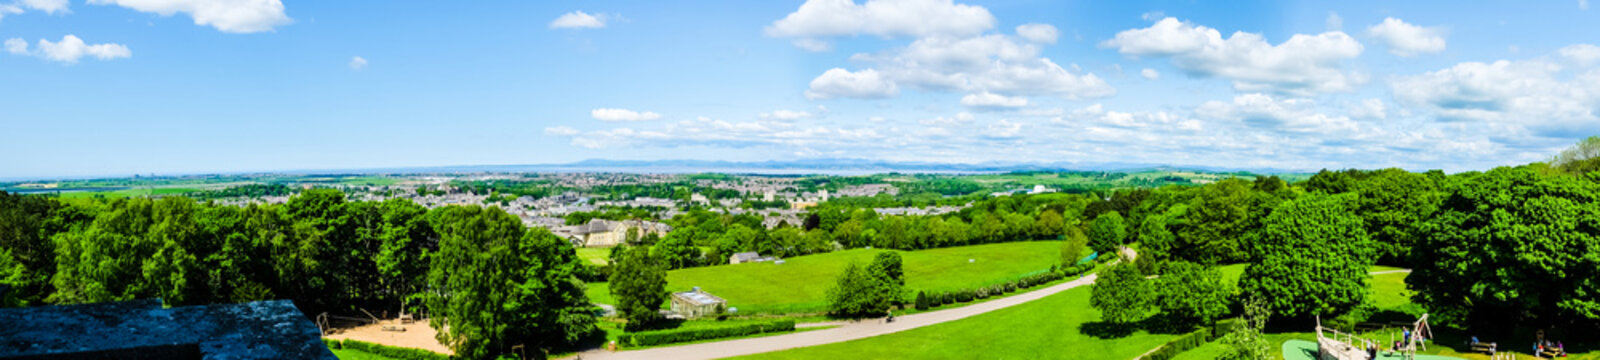 The cityscape of Lancaster, with Morecambe Bay viewed from the Ashton Memorial in Williamson Park.